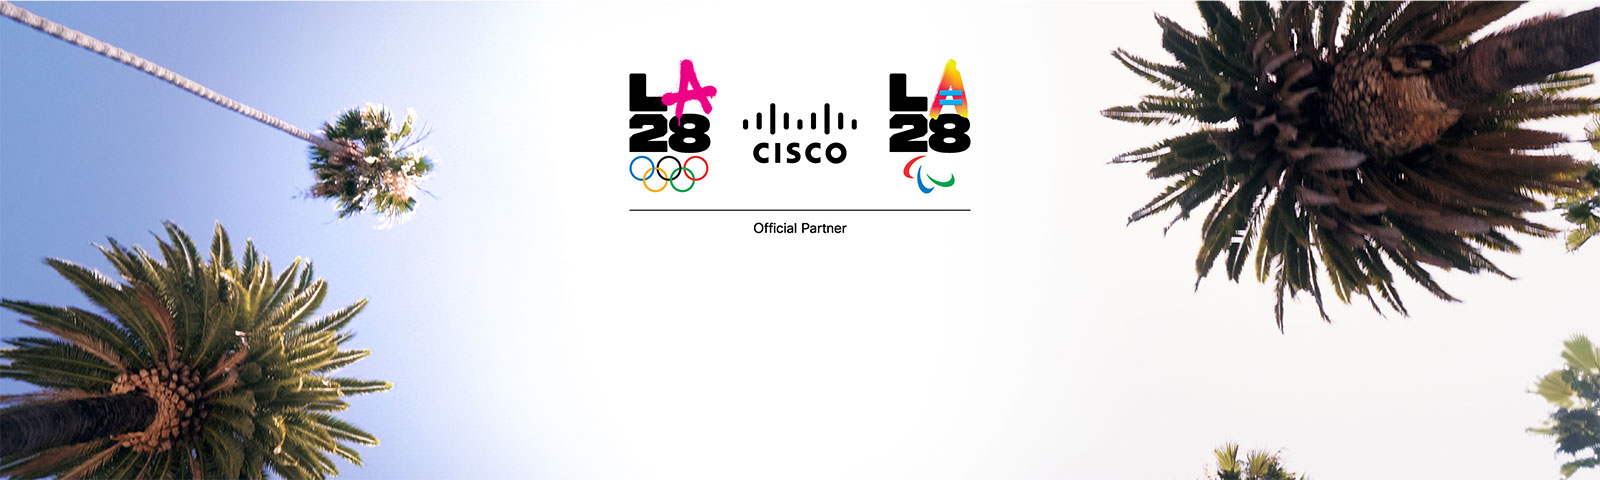 Cisco is an official partner of the LA28 Games